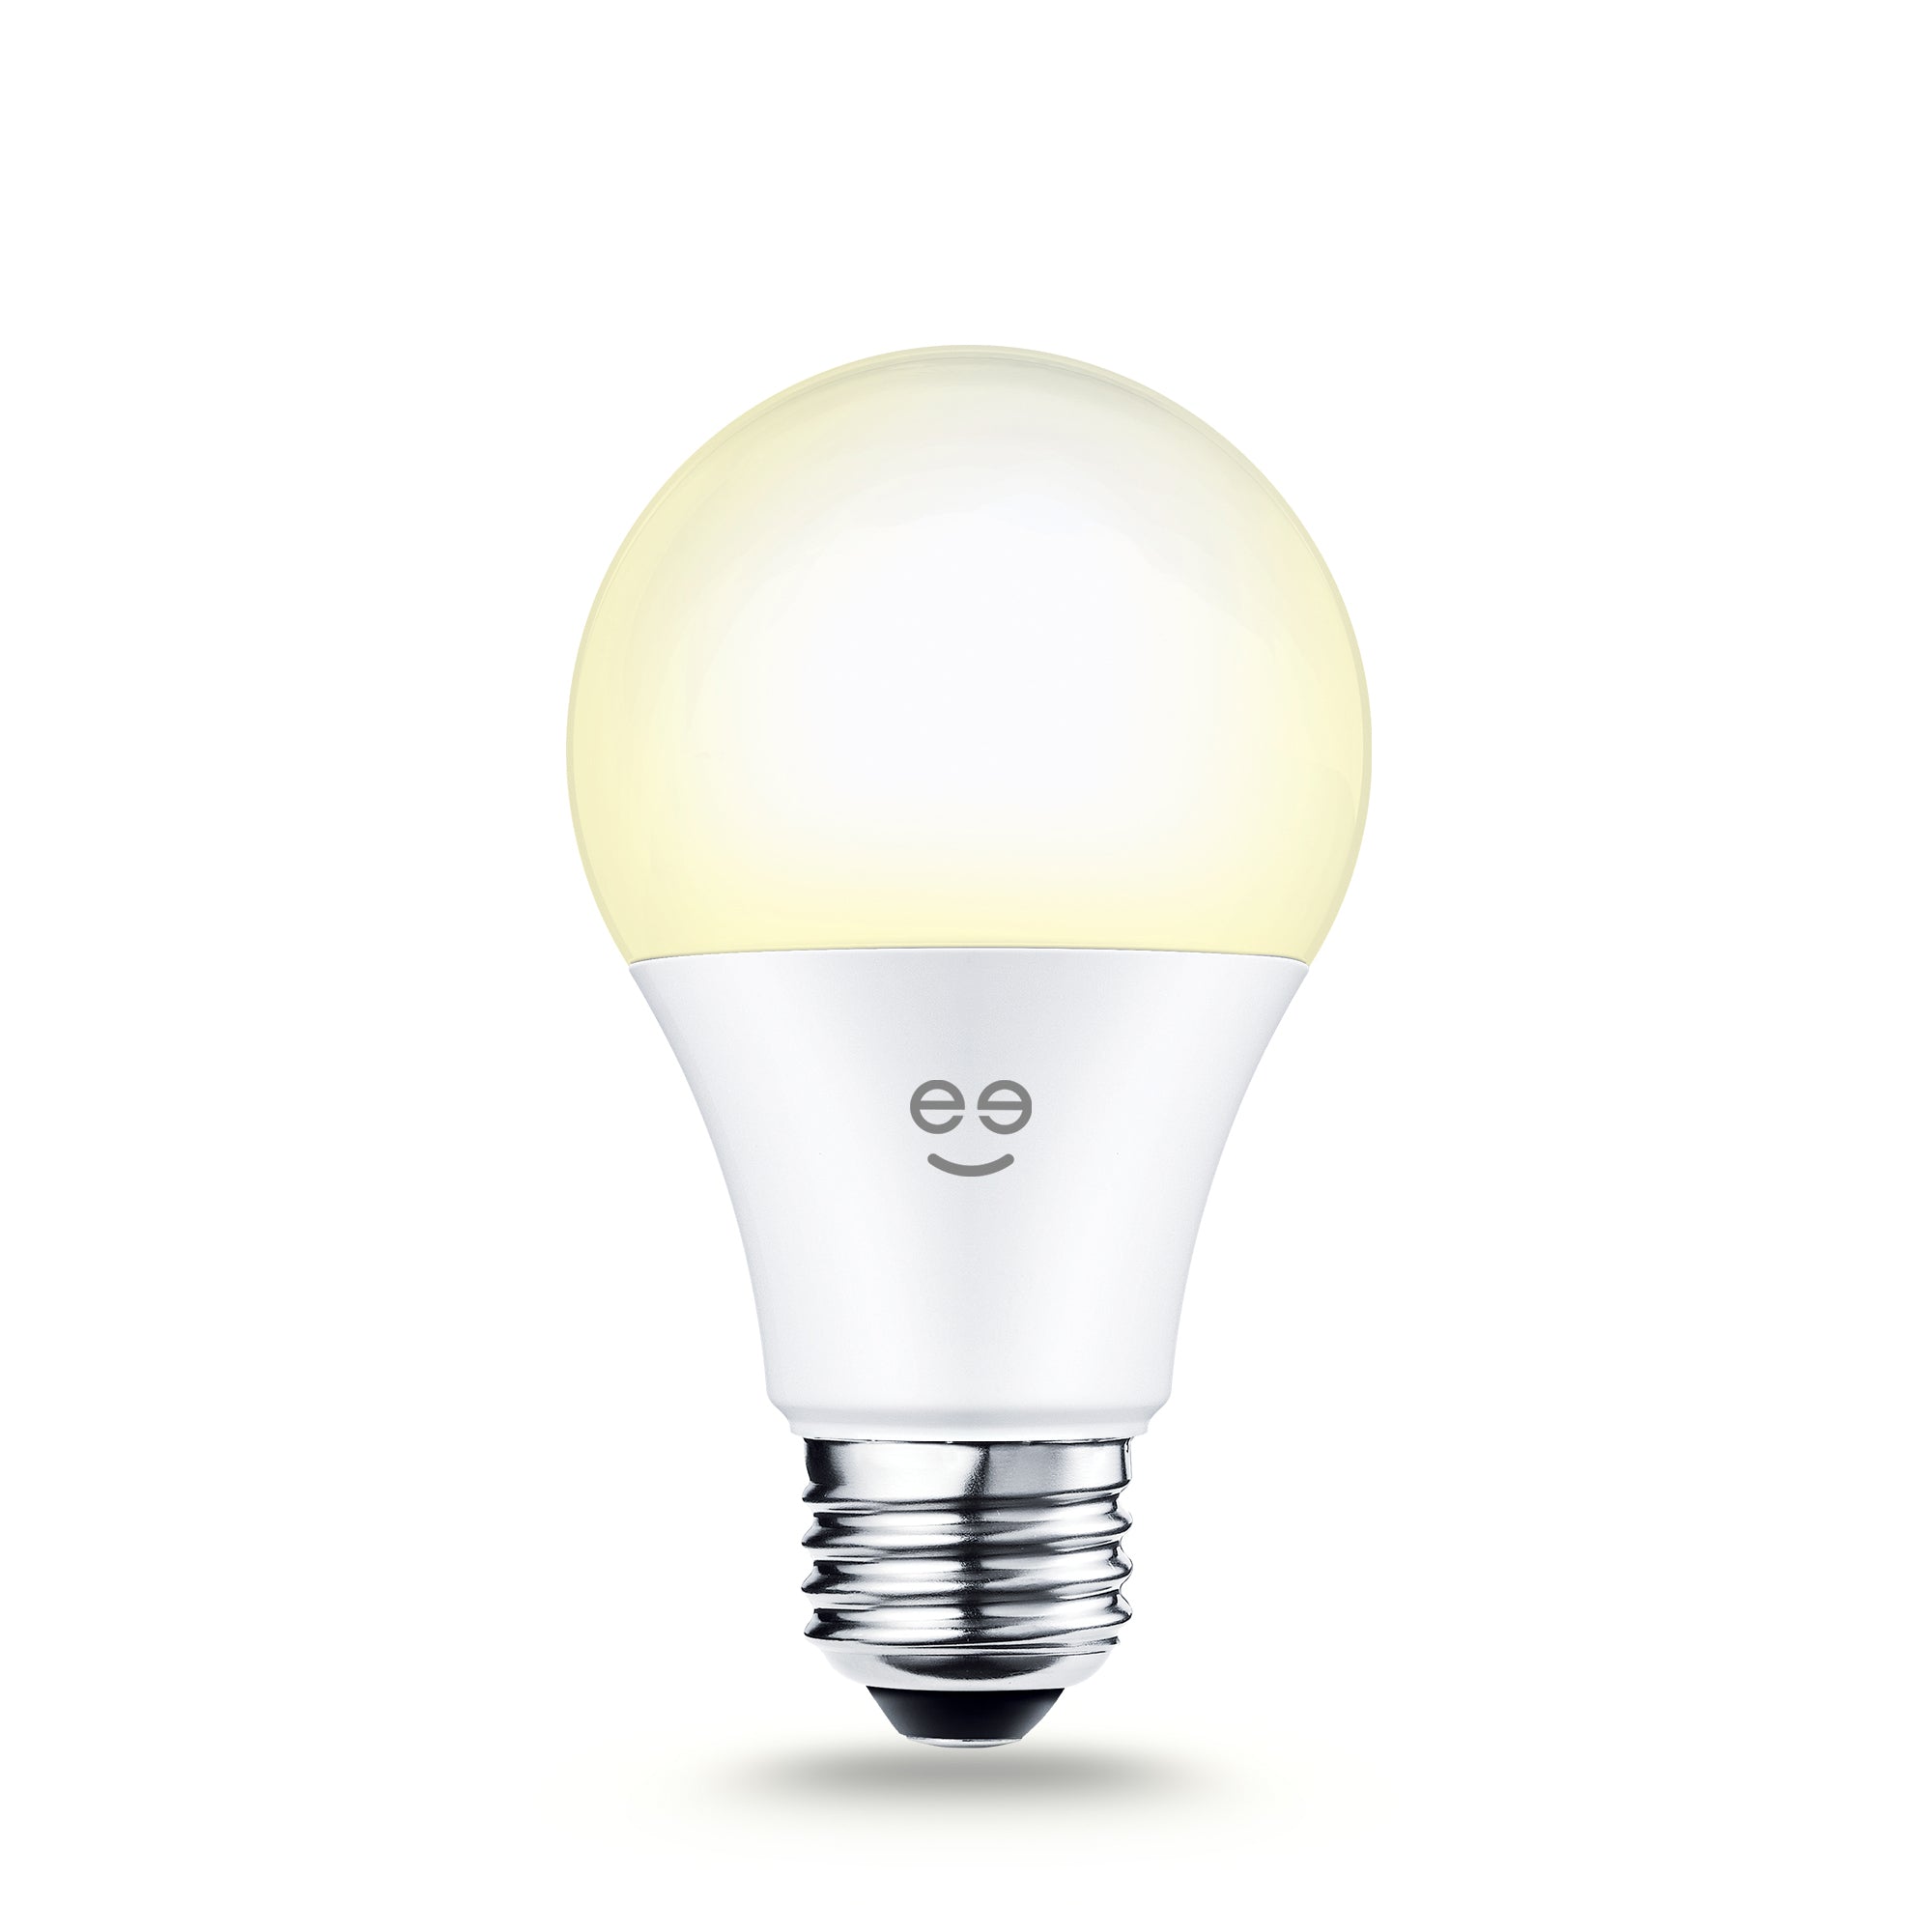 Geeni Lux A19 Smart Bulb - Warm White (3-Pack)